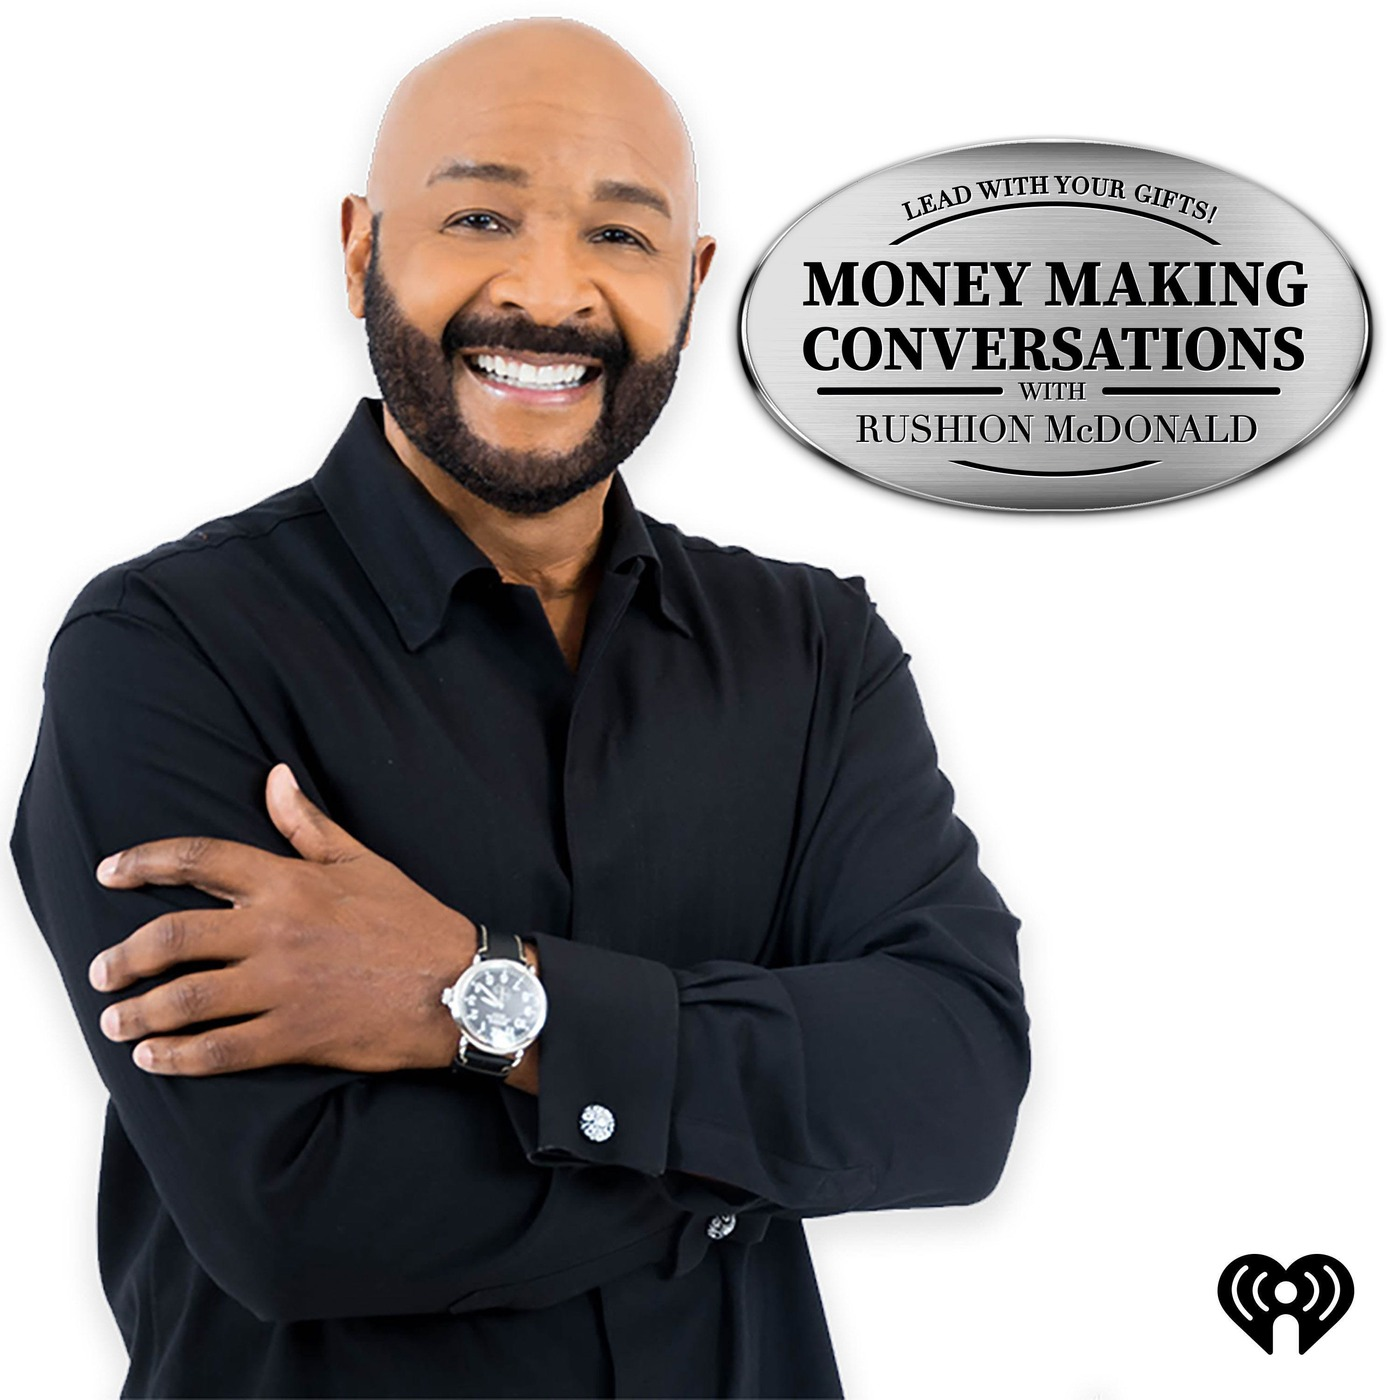 Full Episode: Hollywood Super Producer Will Packer, the face of ESPN Stephen A. Smith, Thomas Miles aka Nephew Tommy of the Steve Harvey Morning Show & the Food Network's Gesine Prado